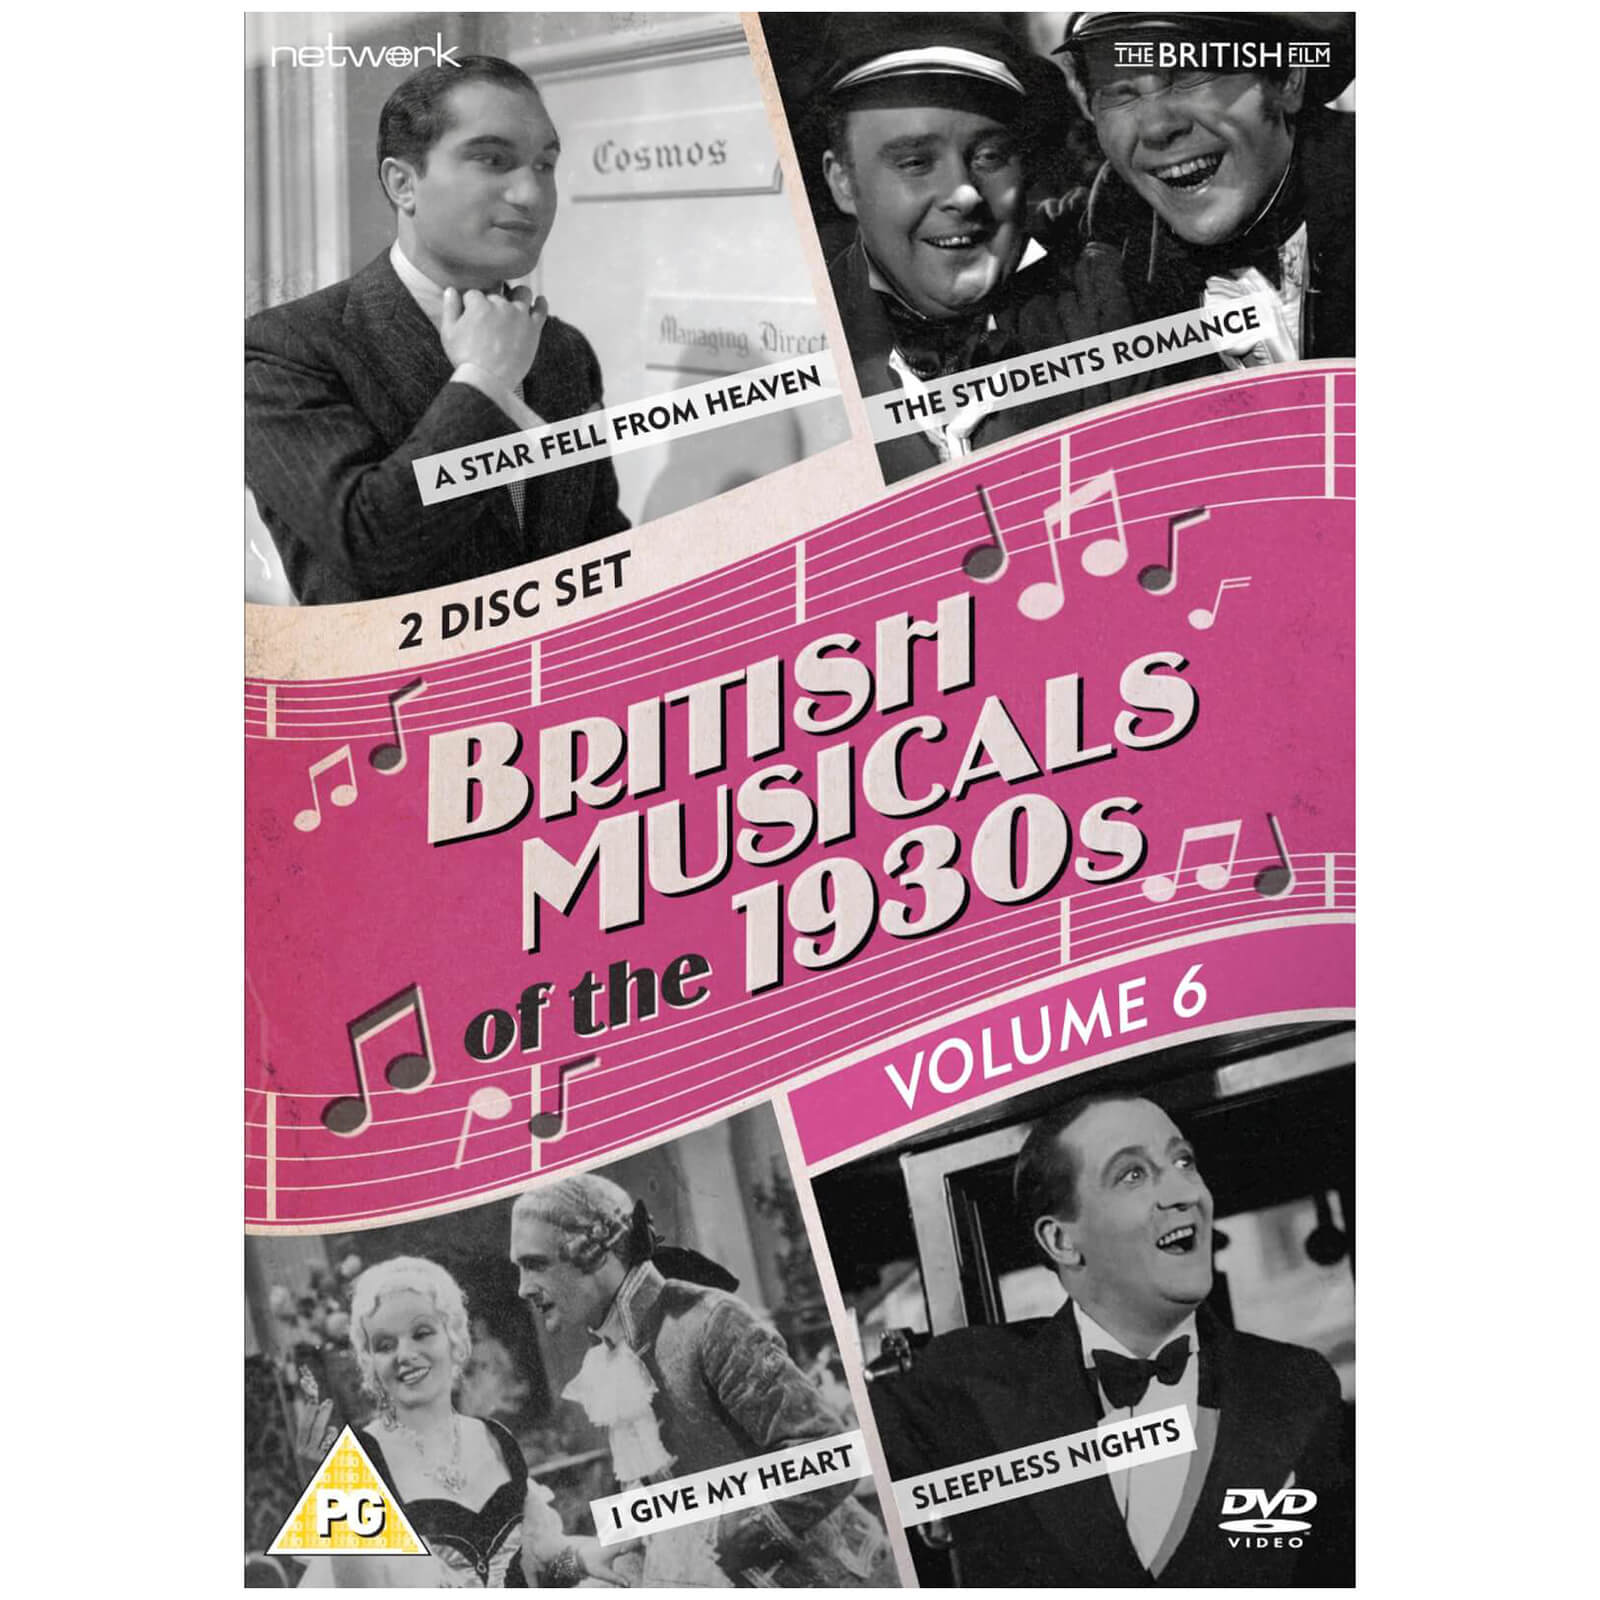 British Musicals of the 1930s Vol. 6 (Facing the Music/Sleepless Nights/A Star Fell from Heaven/The Student's Romance) von Network